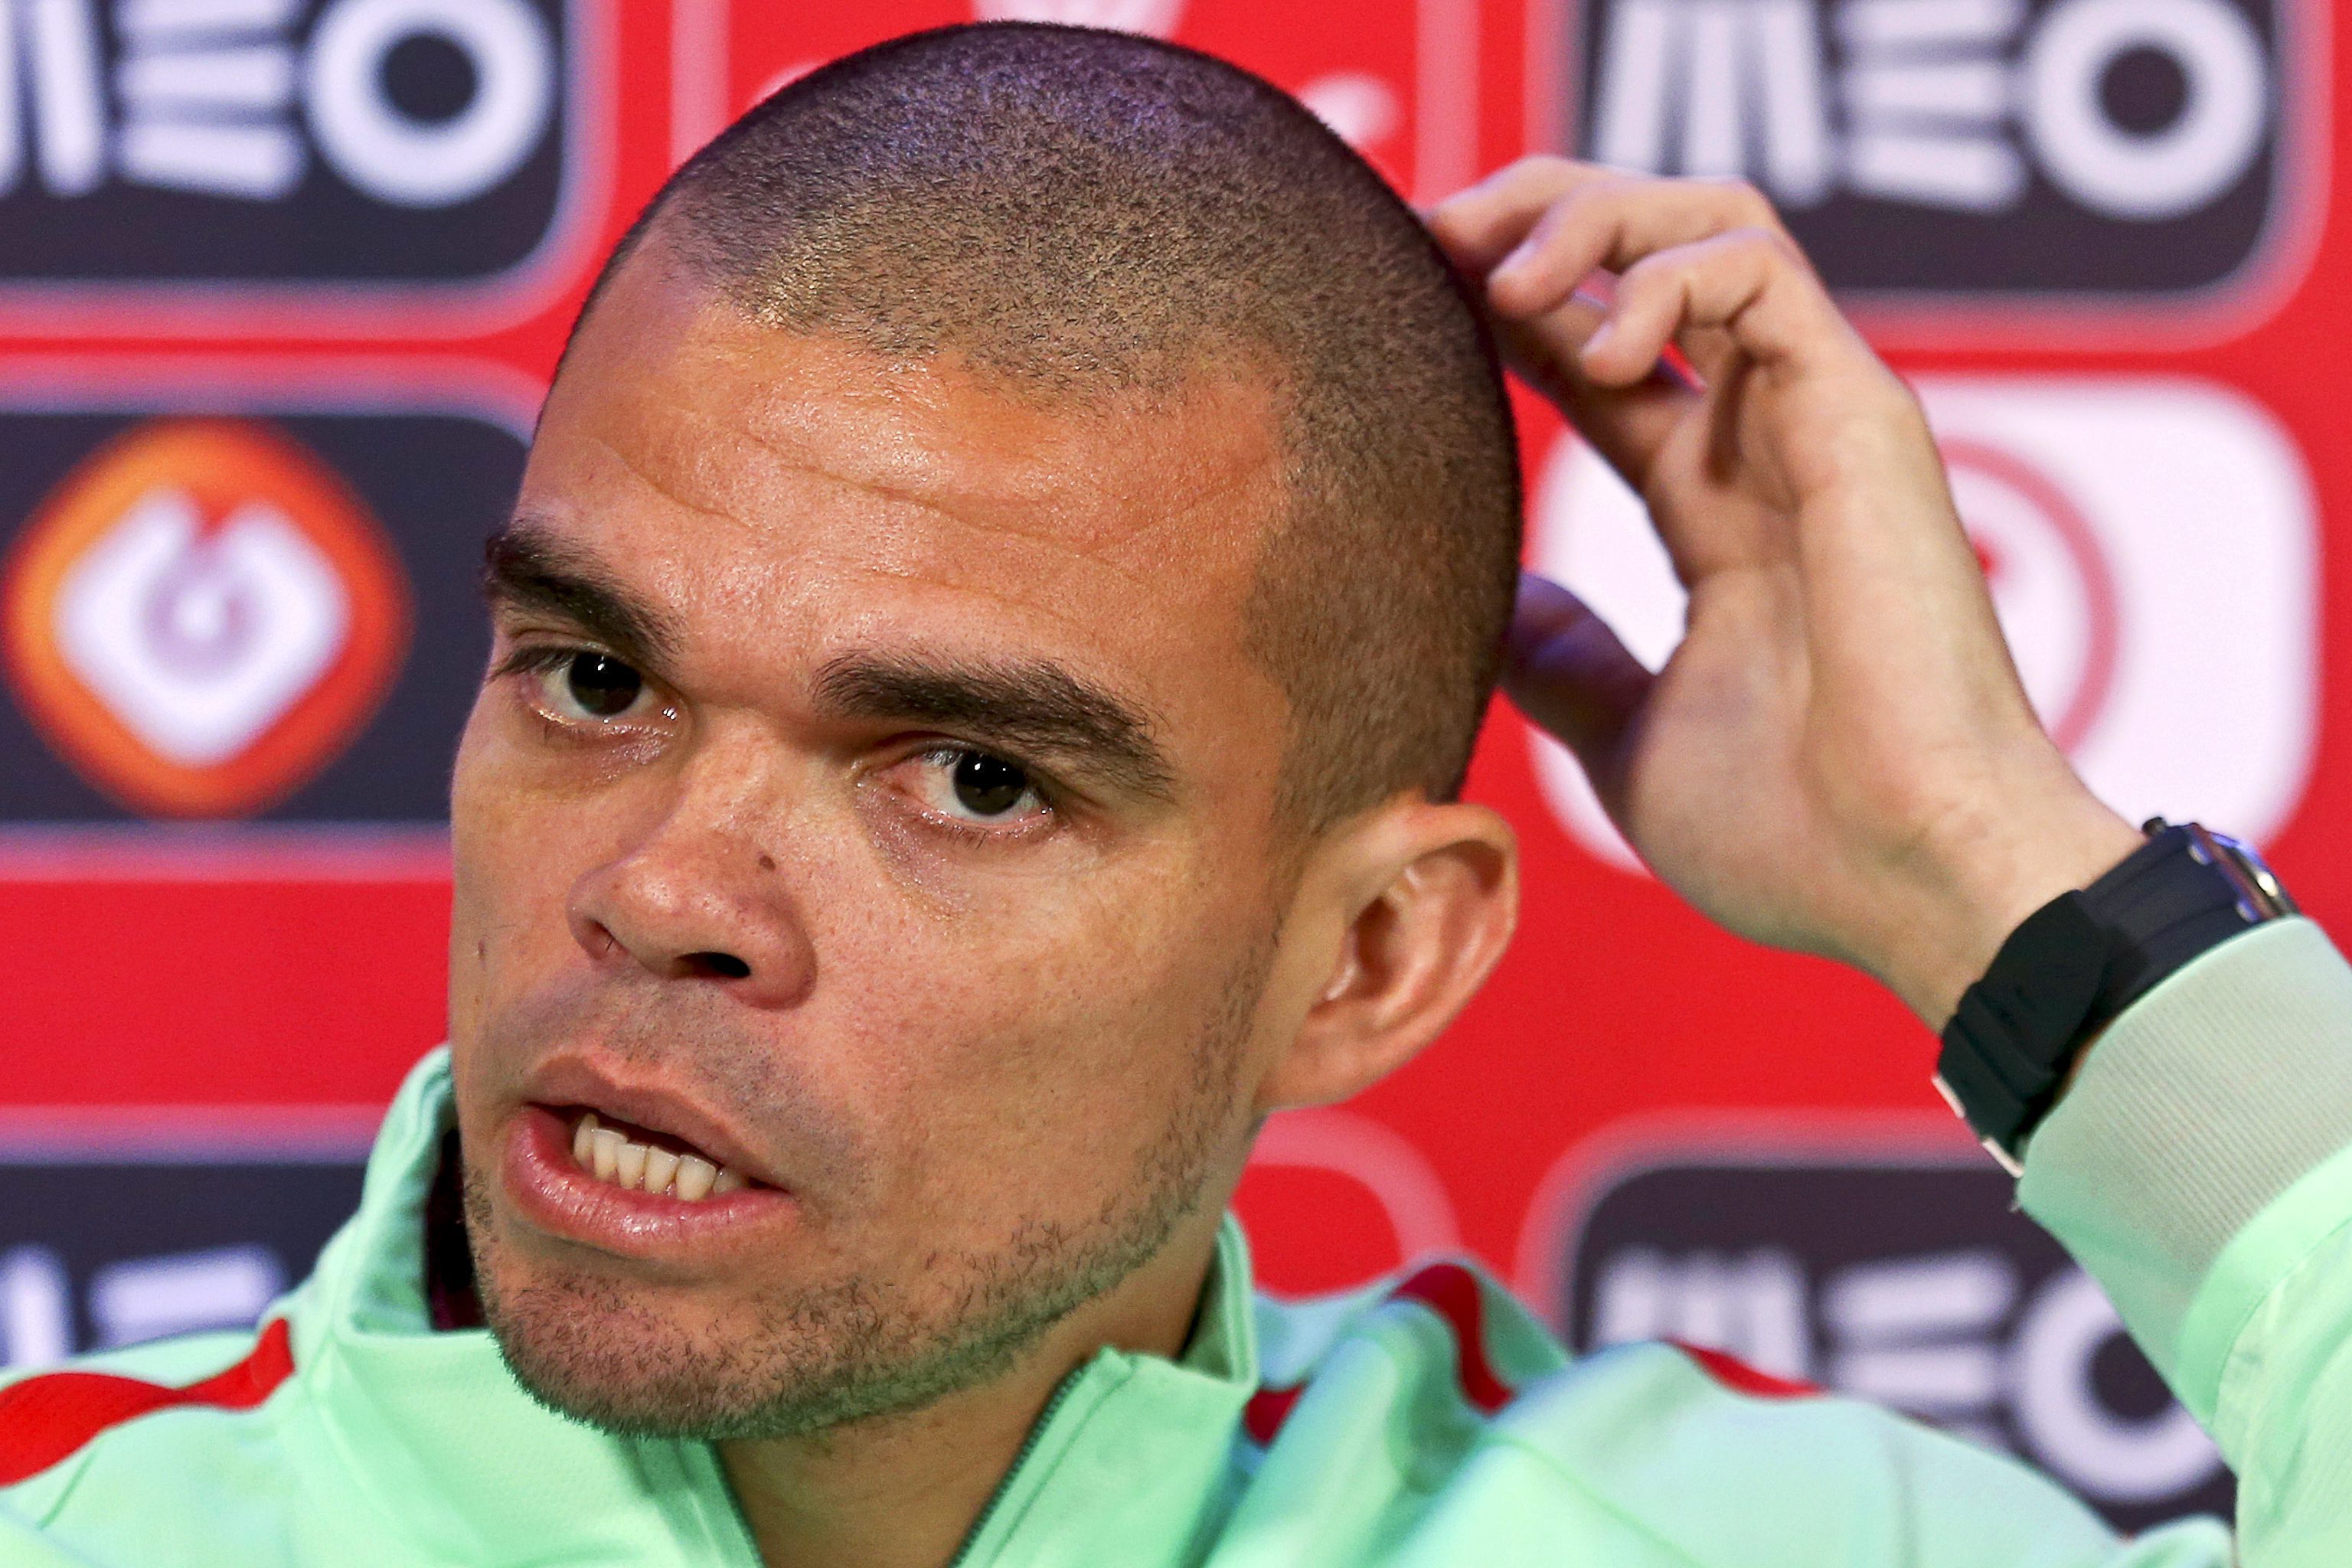 epa05229456 Portuguese national soccer team defender Pepe speaks during a press conference at the Restelo stadium in Lisbon, Portugal, 24 March 2016. Portugal will face Bulgaria in an international friendly soccer match on 25 March 2016.  EPA/ANTONIO COTRIM